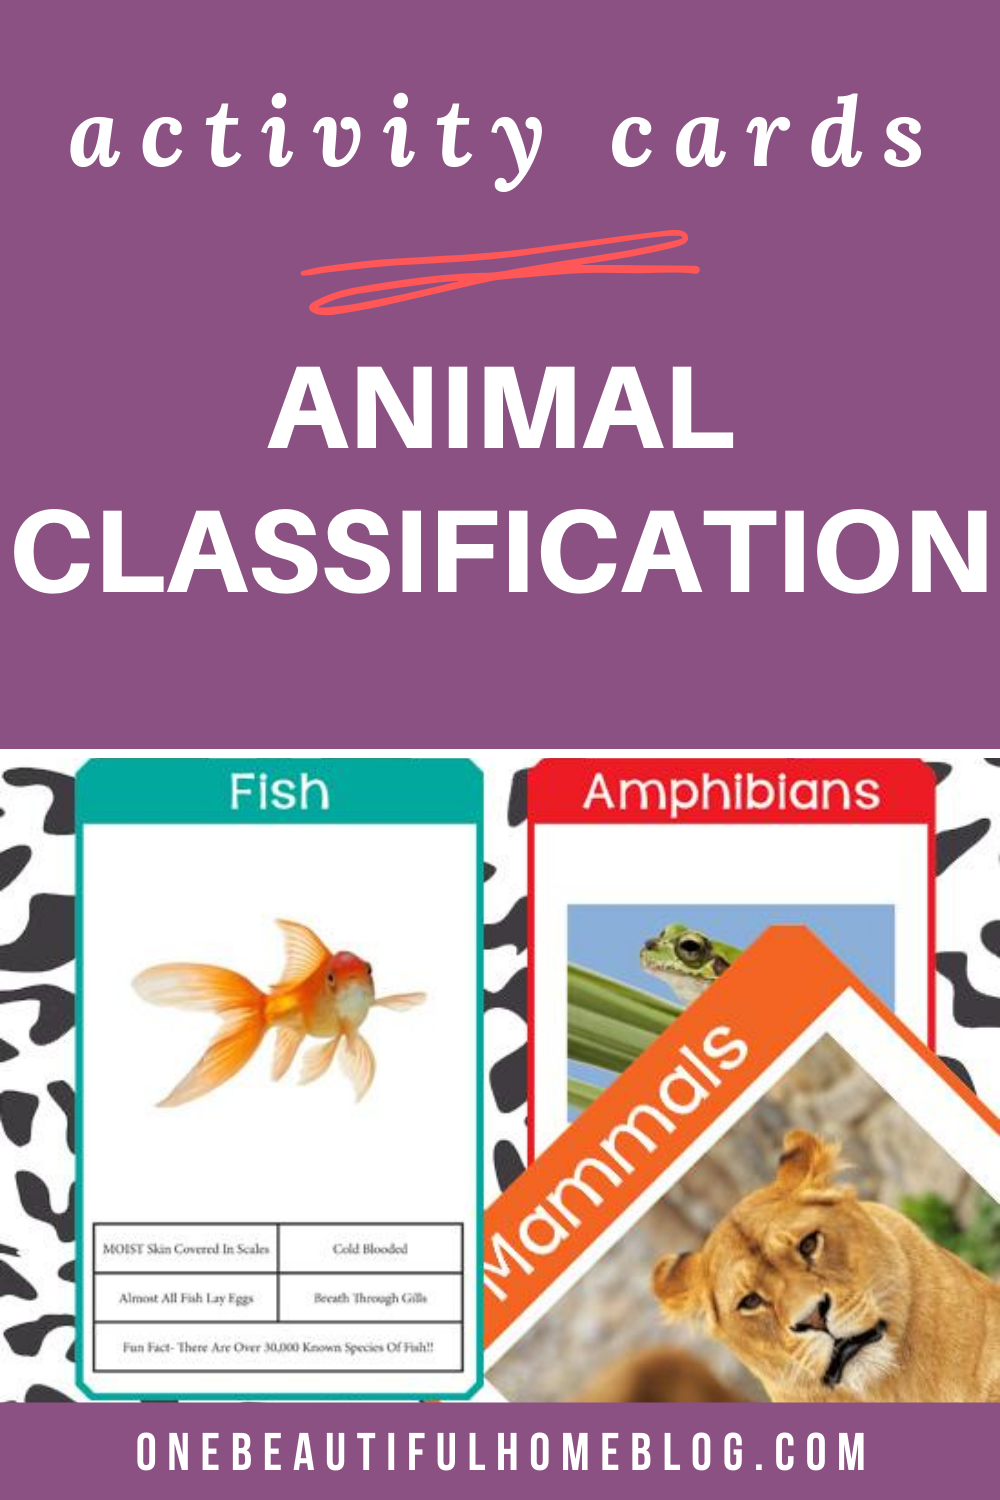 Animal Classification Cards - One Beautiful Home